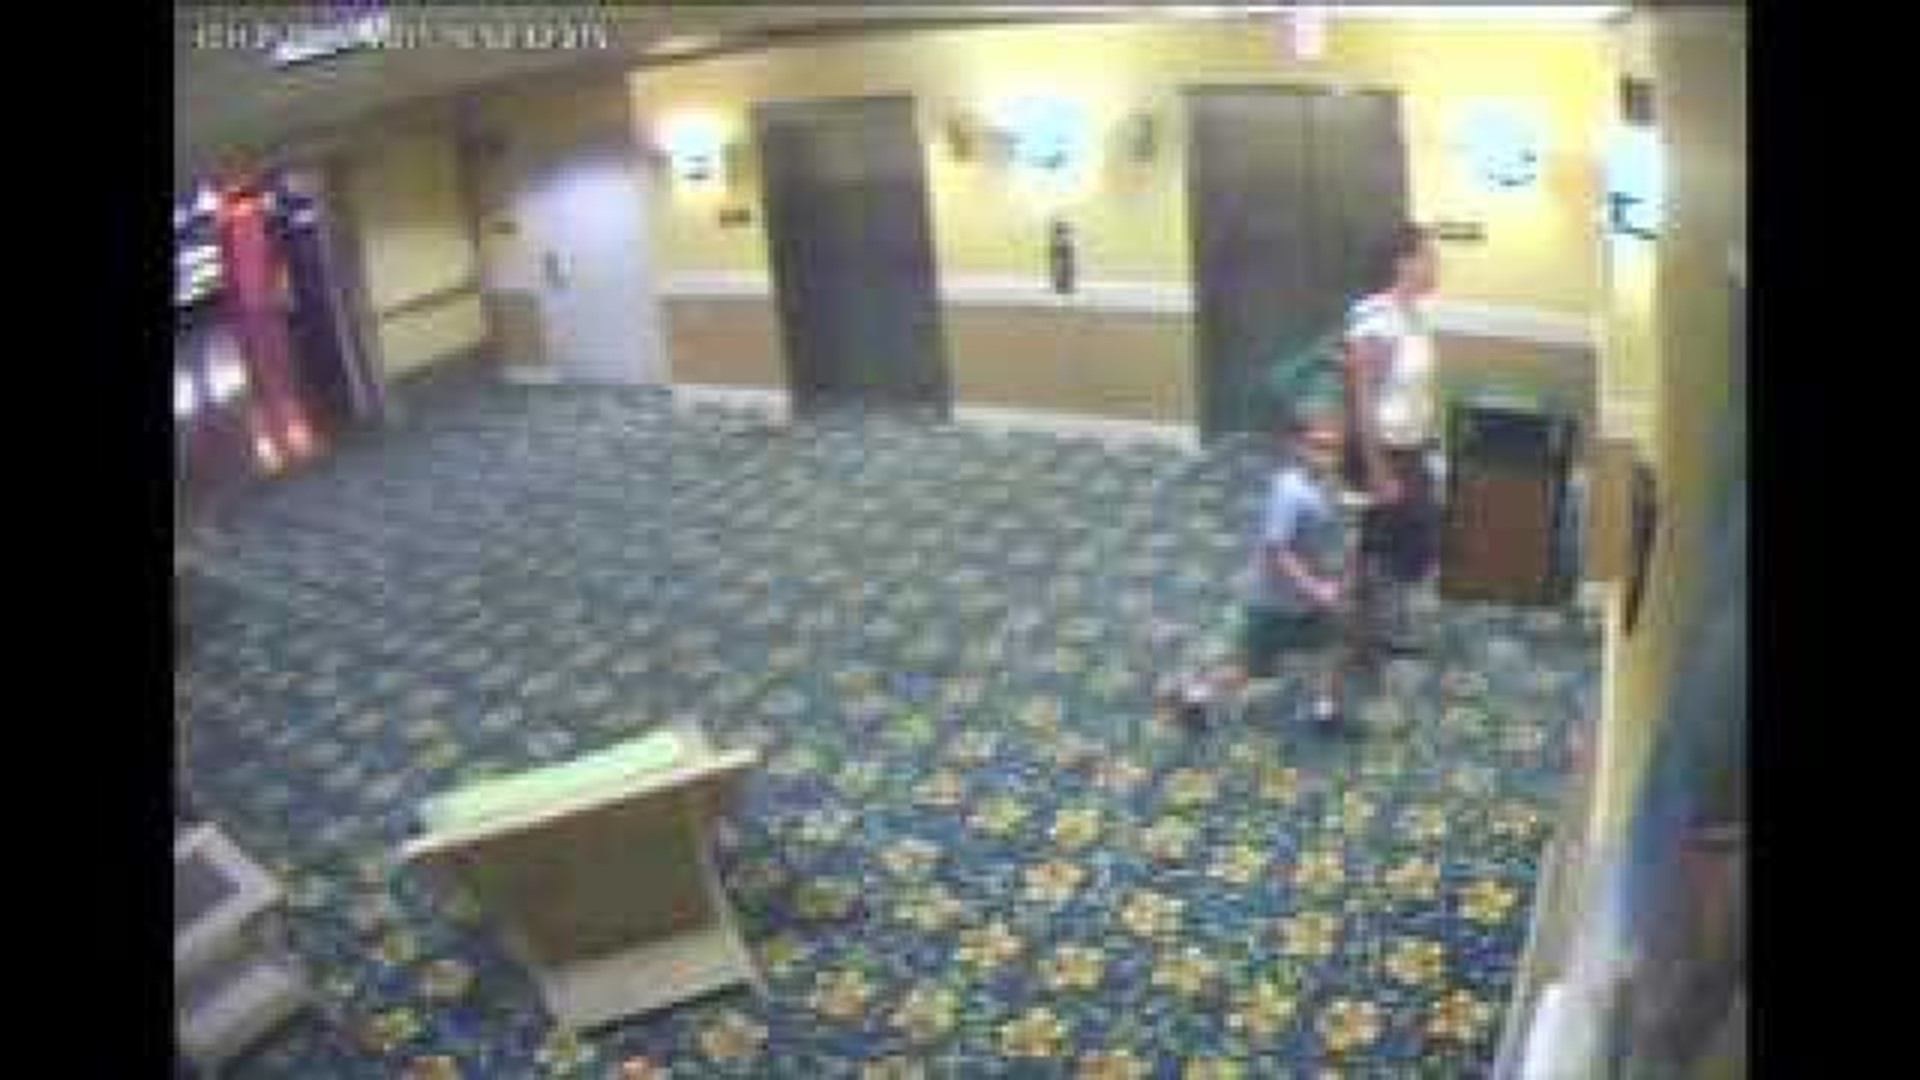 Surveillance Video of Amy and Timmothy Pitzen at Key Lime Cove lobby